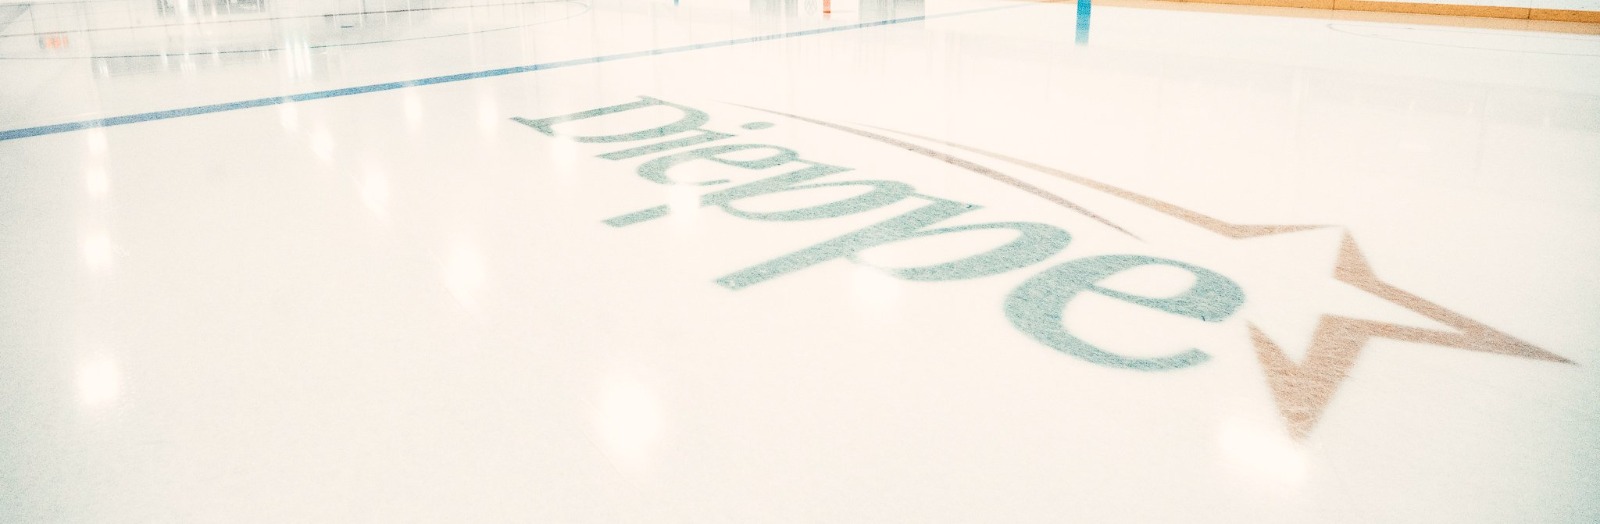 Dieppe logo on ice surface